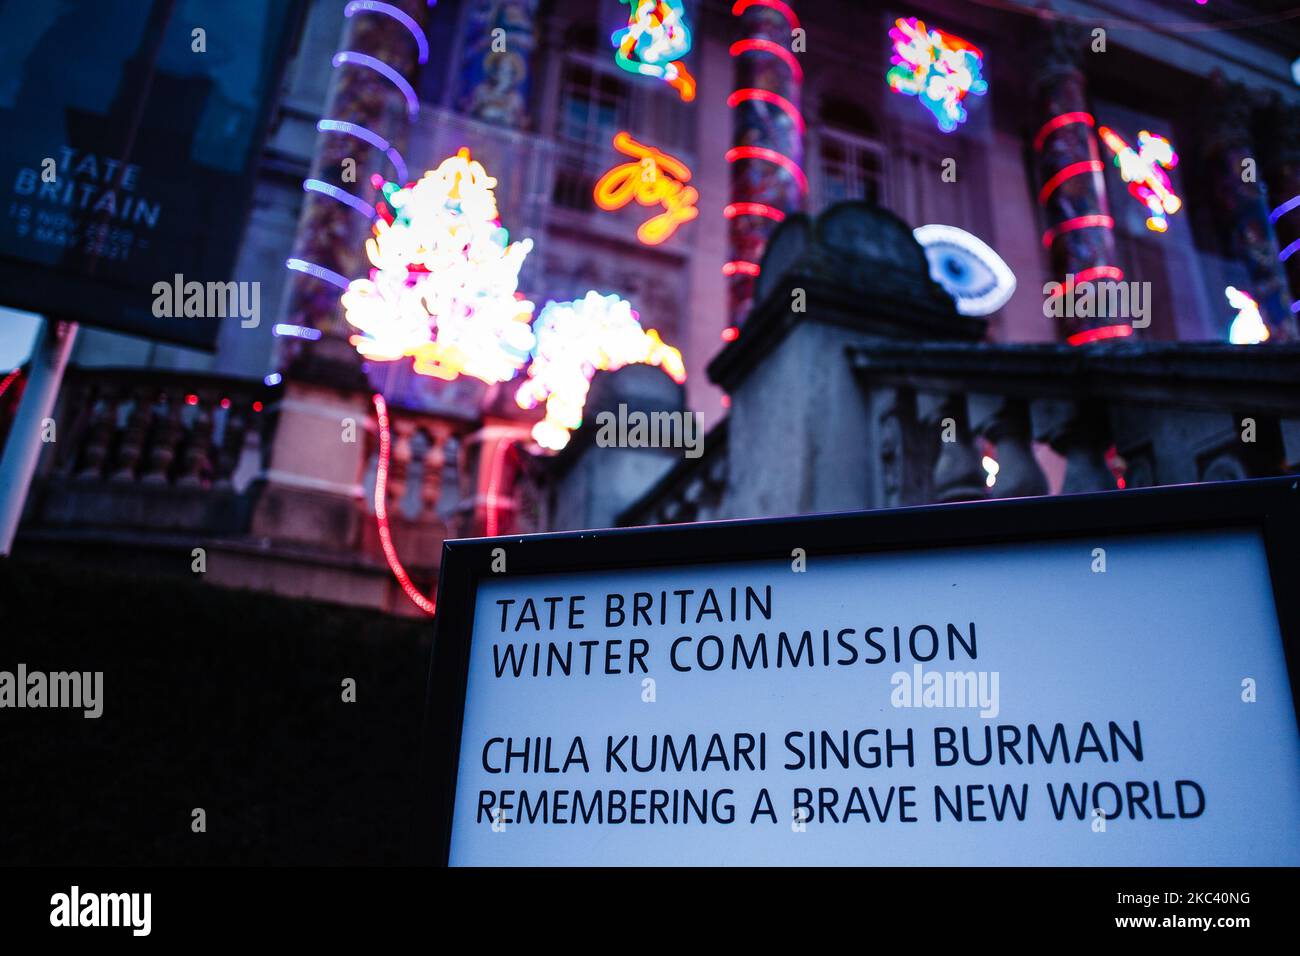 Neon light installation 'Remembering A Brave New World', by British artist Chila Kumari Singh Burman, covers the facade of the Tate Britain art gallery in London, England, on November 13, 2020. The work, noted to combine 'Hindu mythology, Bollywood imagery, colonial history and personal memories' (including Burman's family's ice-cream van), forms the fourth annual Winter Commission at the gallery and was unveiled today, on the eve of Diwali, the Indian festival of lights. The installation will be in place until January 31 next year. (Photo by David Cliff/NurPhoto) Stock Photo